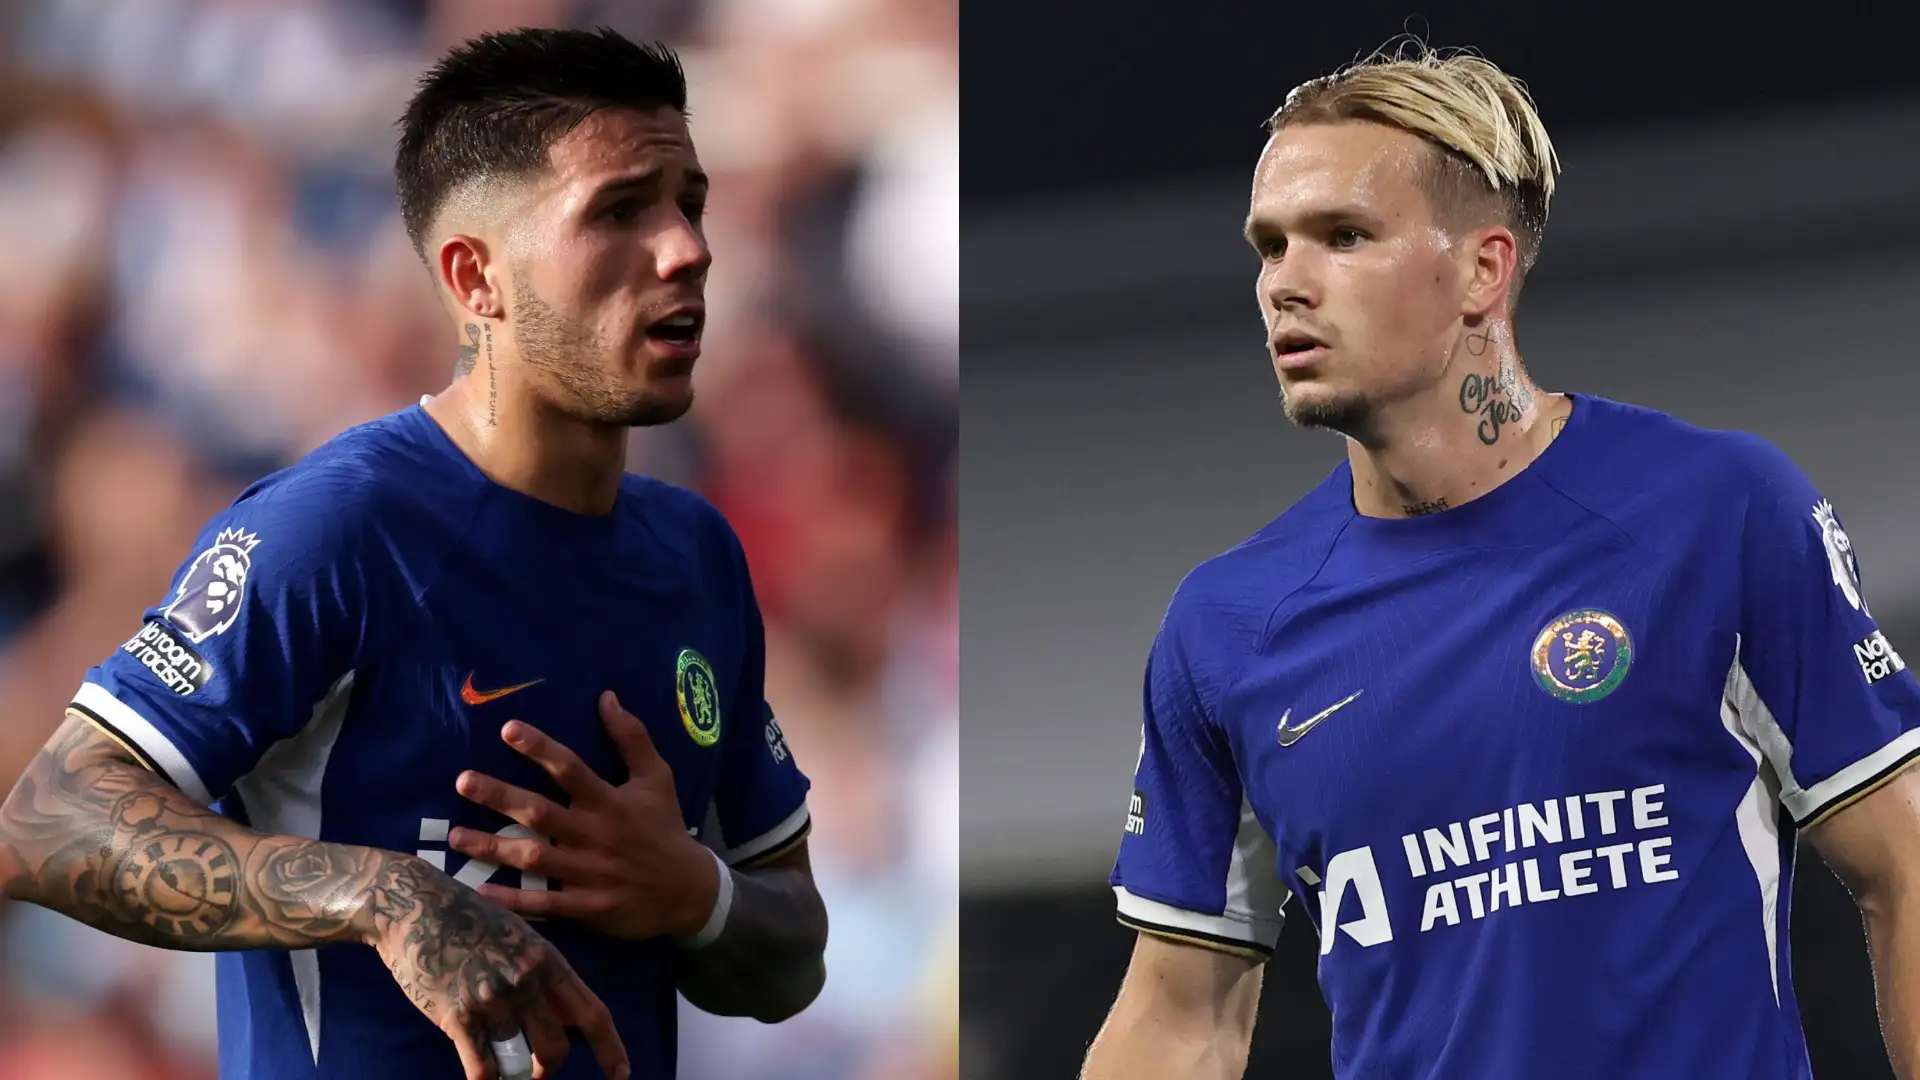 Why Chelsea have blocked Enzo Fernandez and Mykhailo Mudryk from starring at the 2024 Olympics - explained